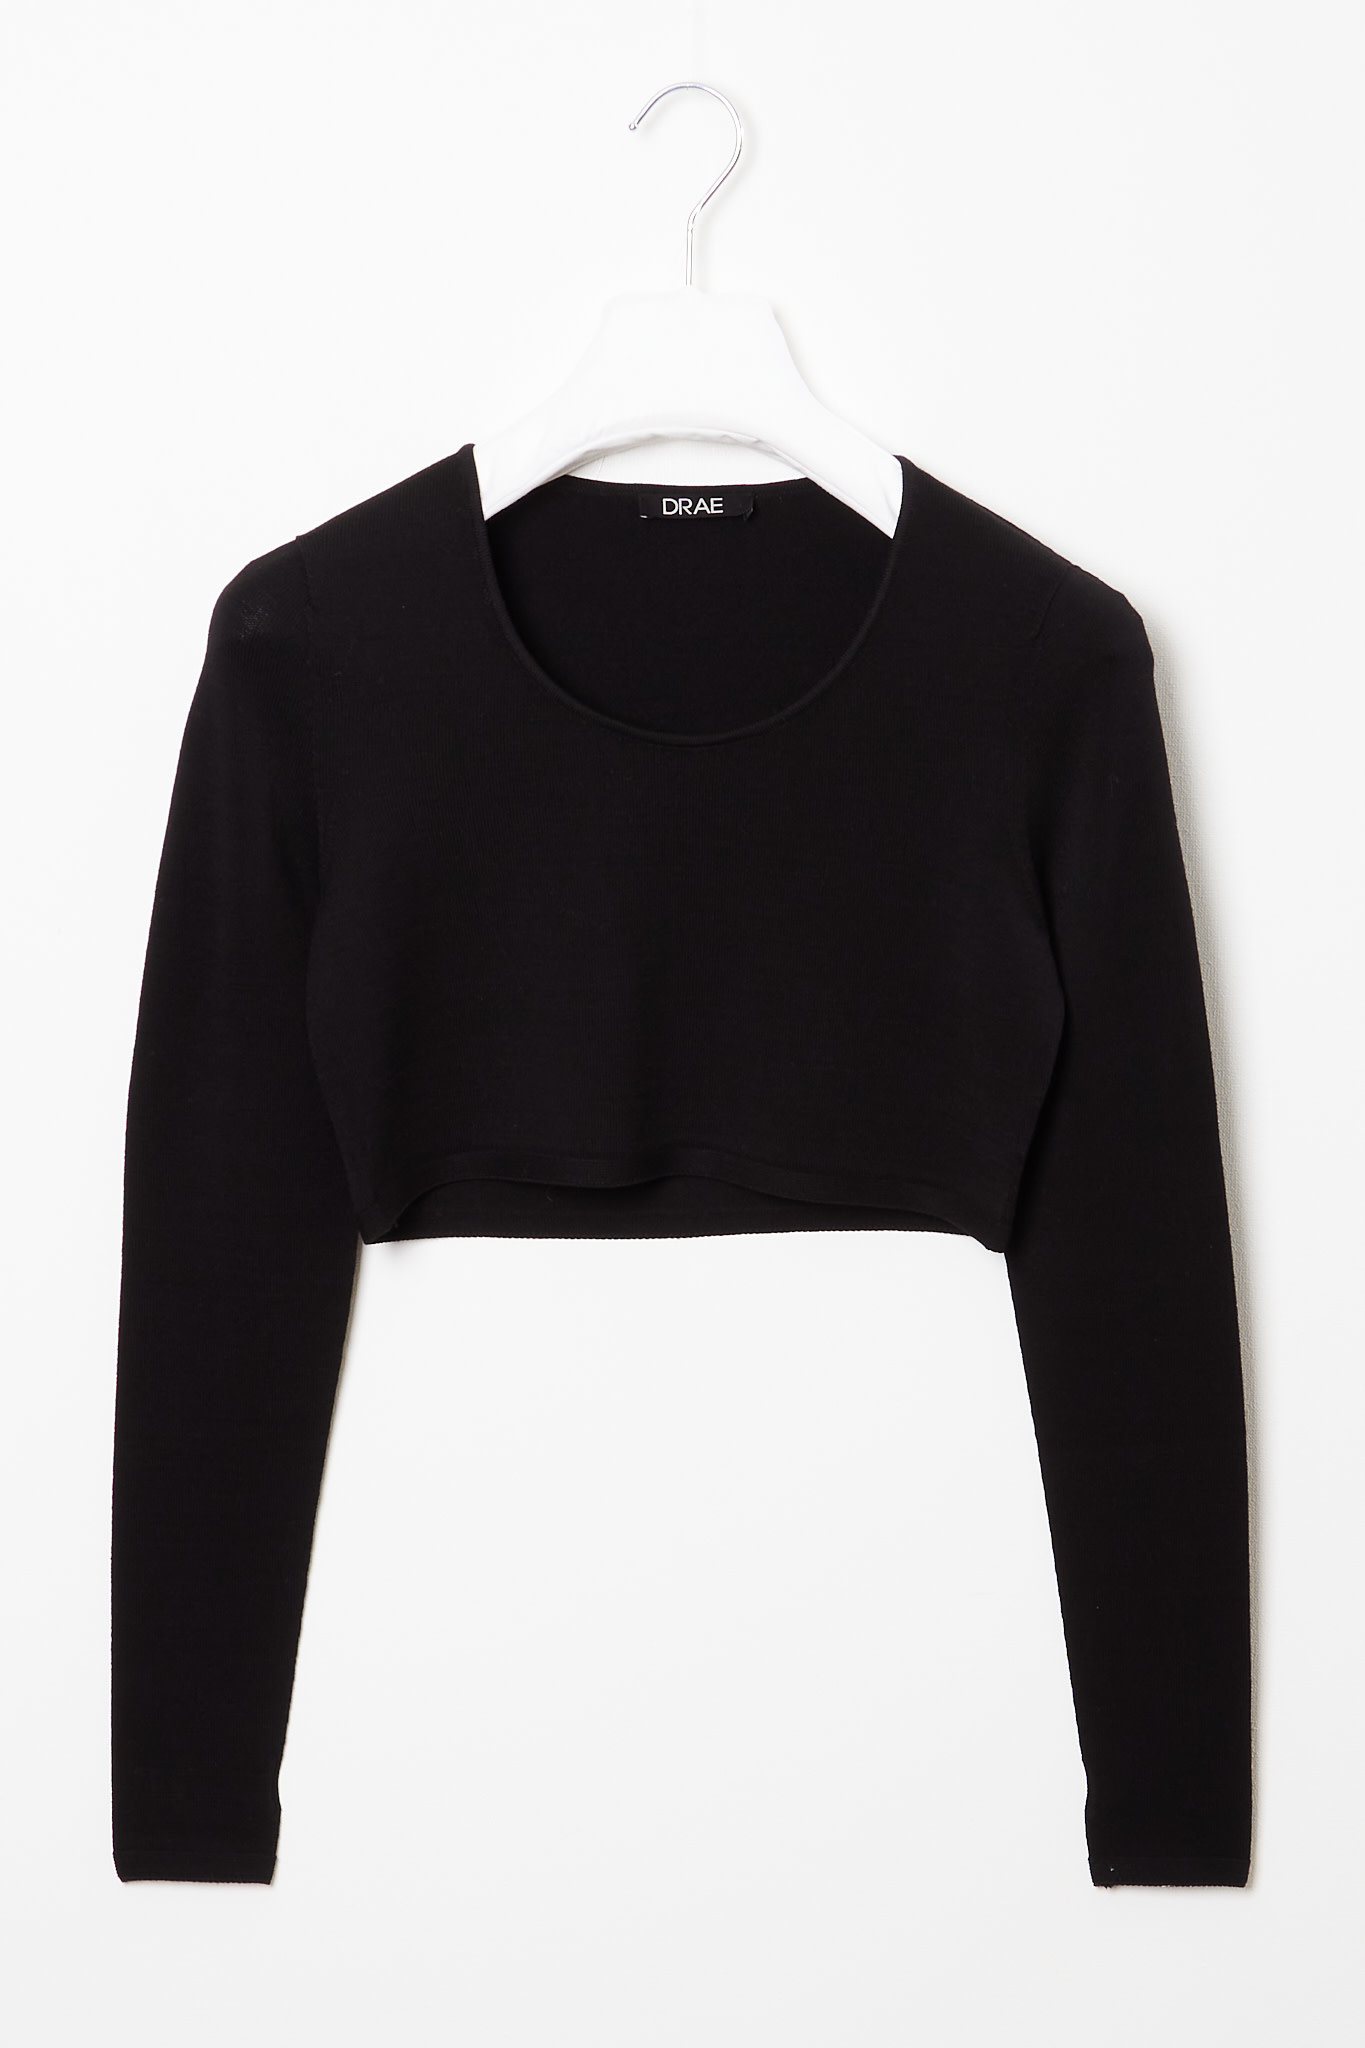 Wholegarment cropped knit top